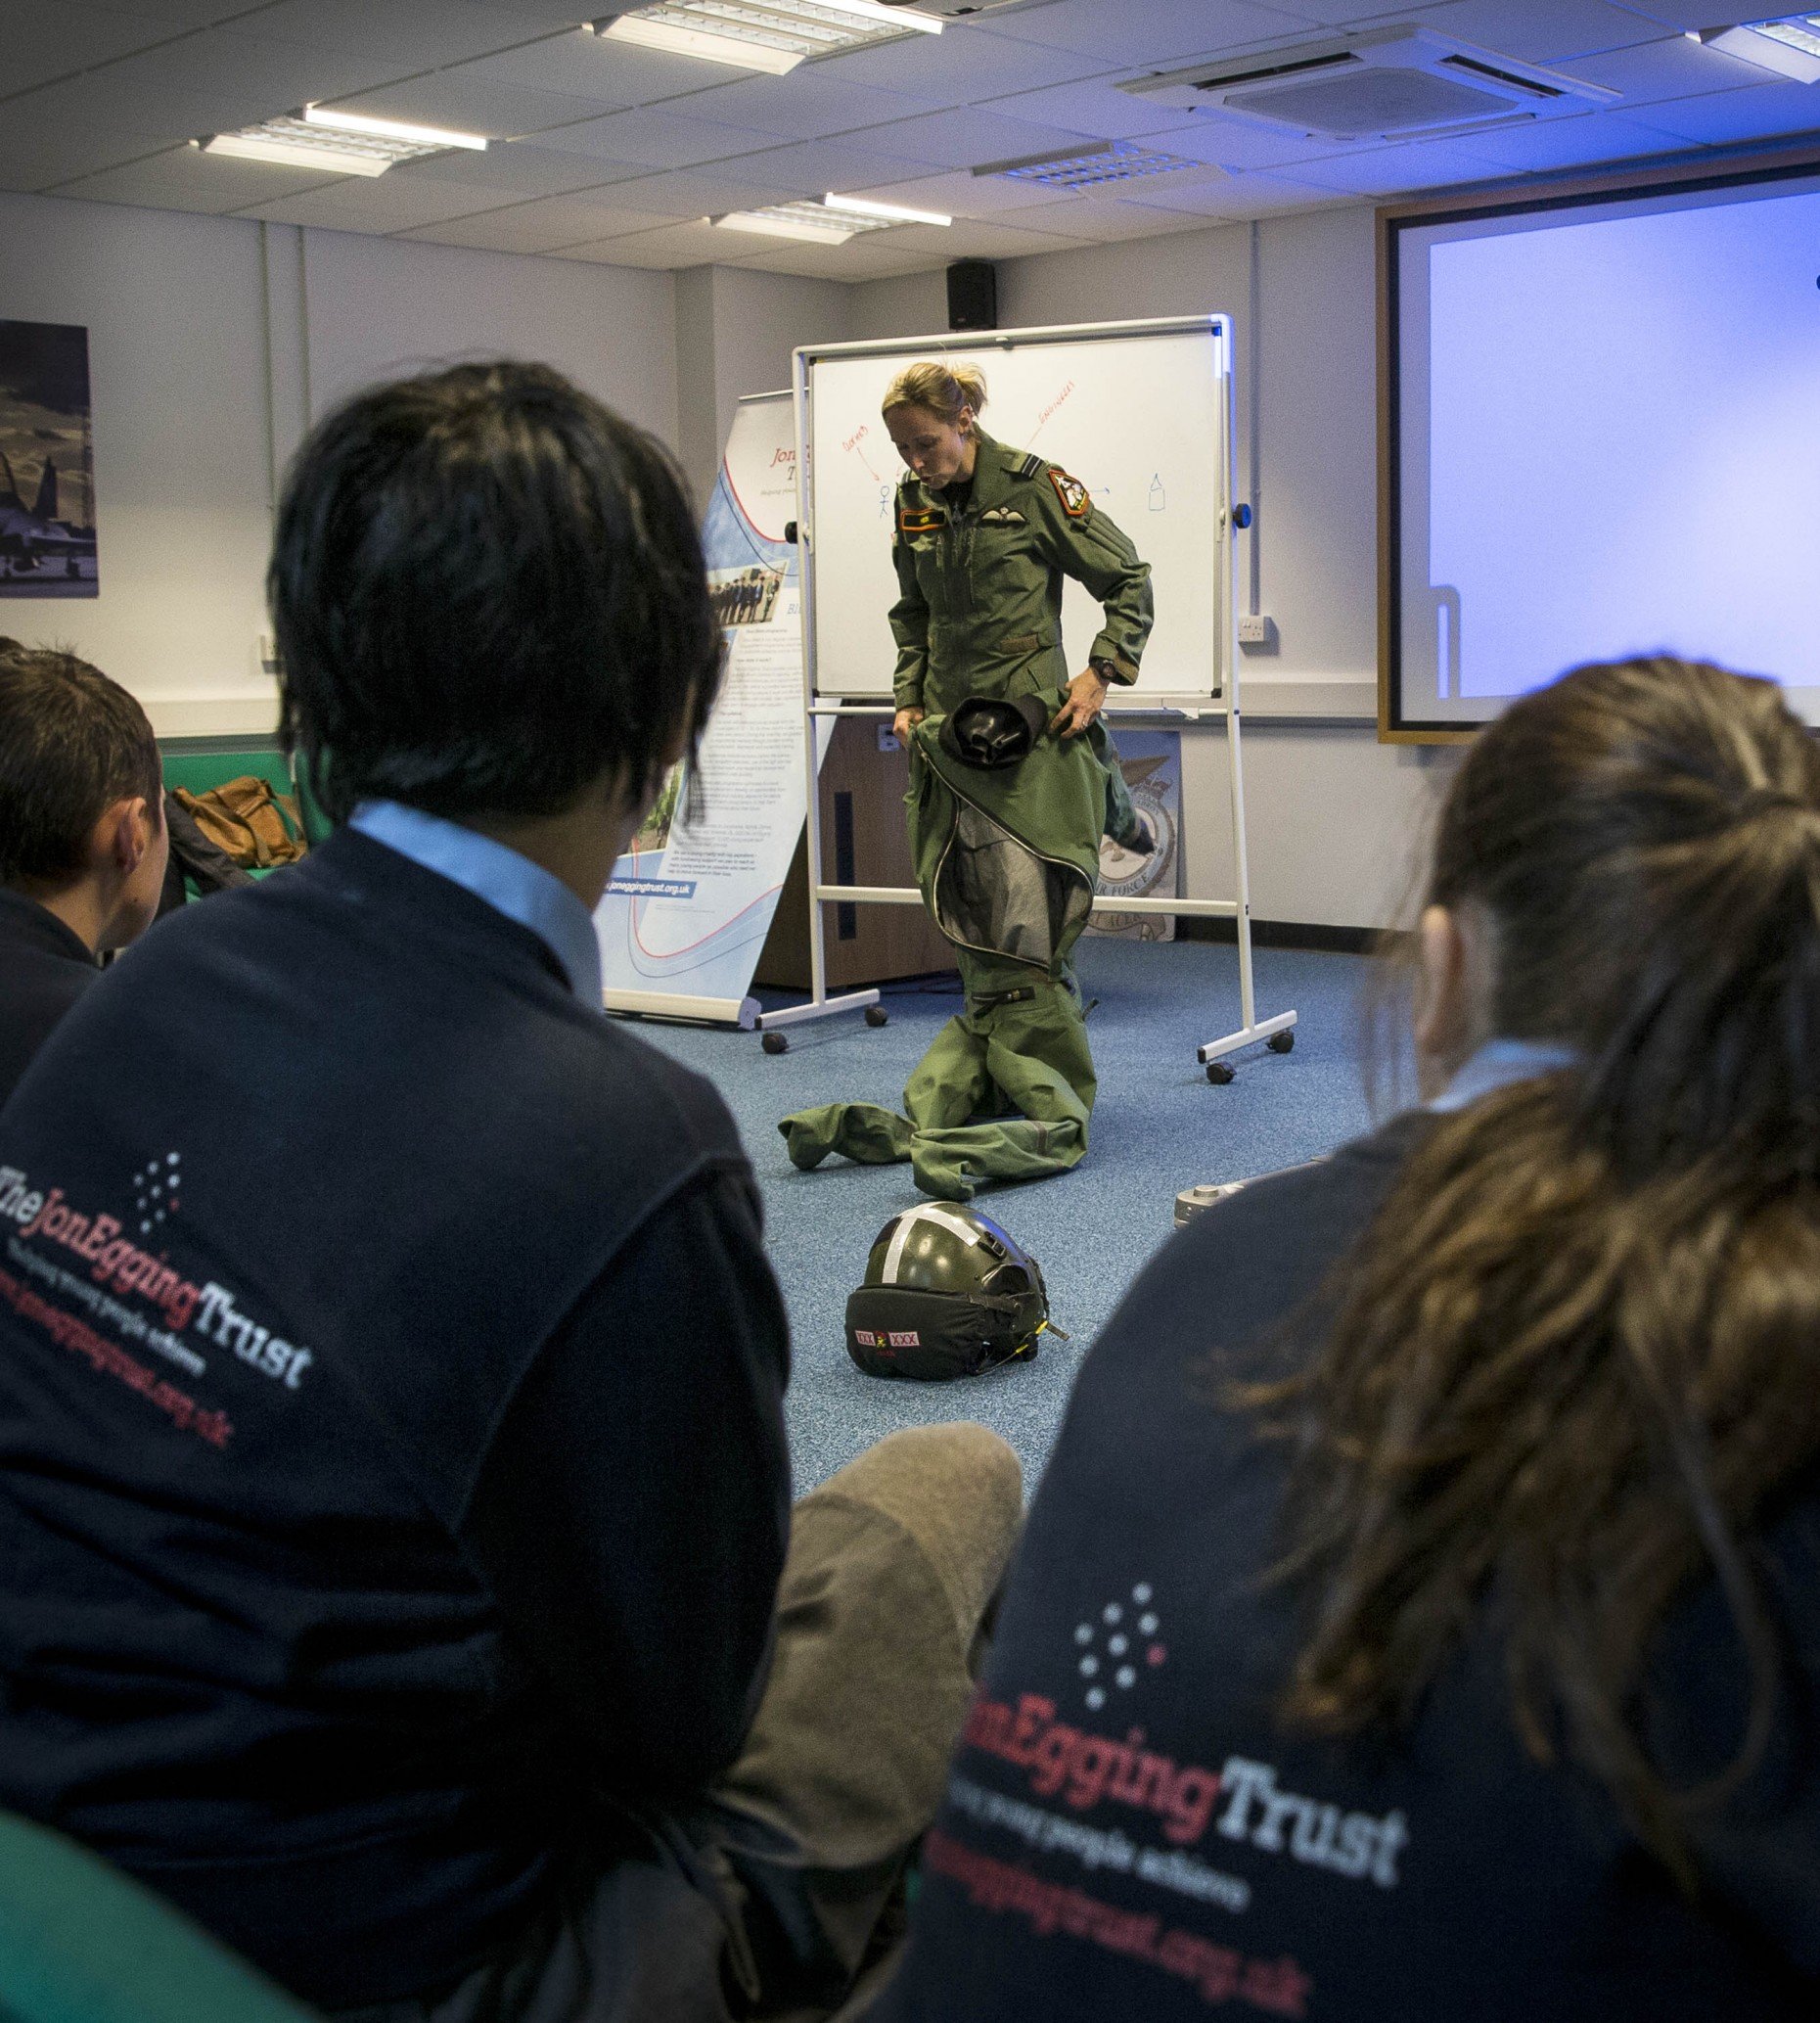 Typhoon pilot in Communications session